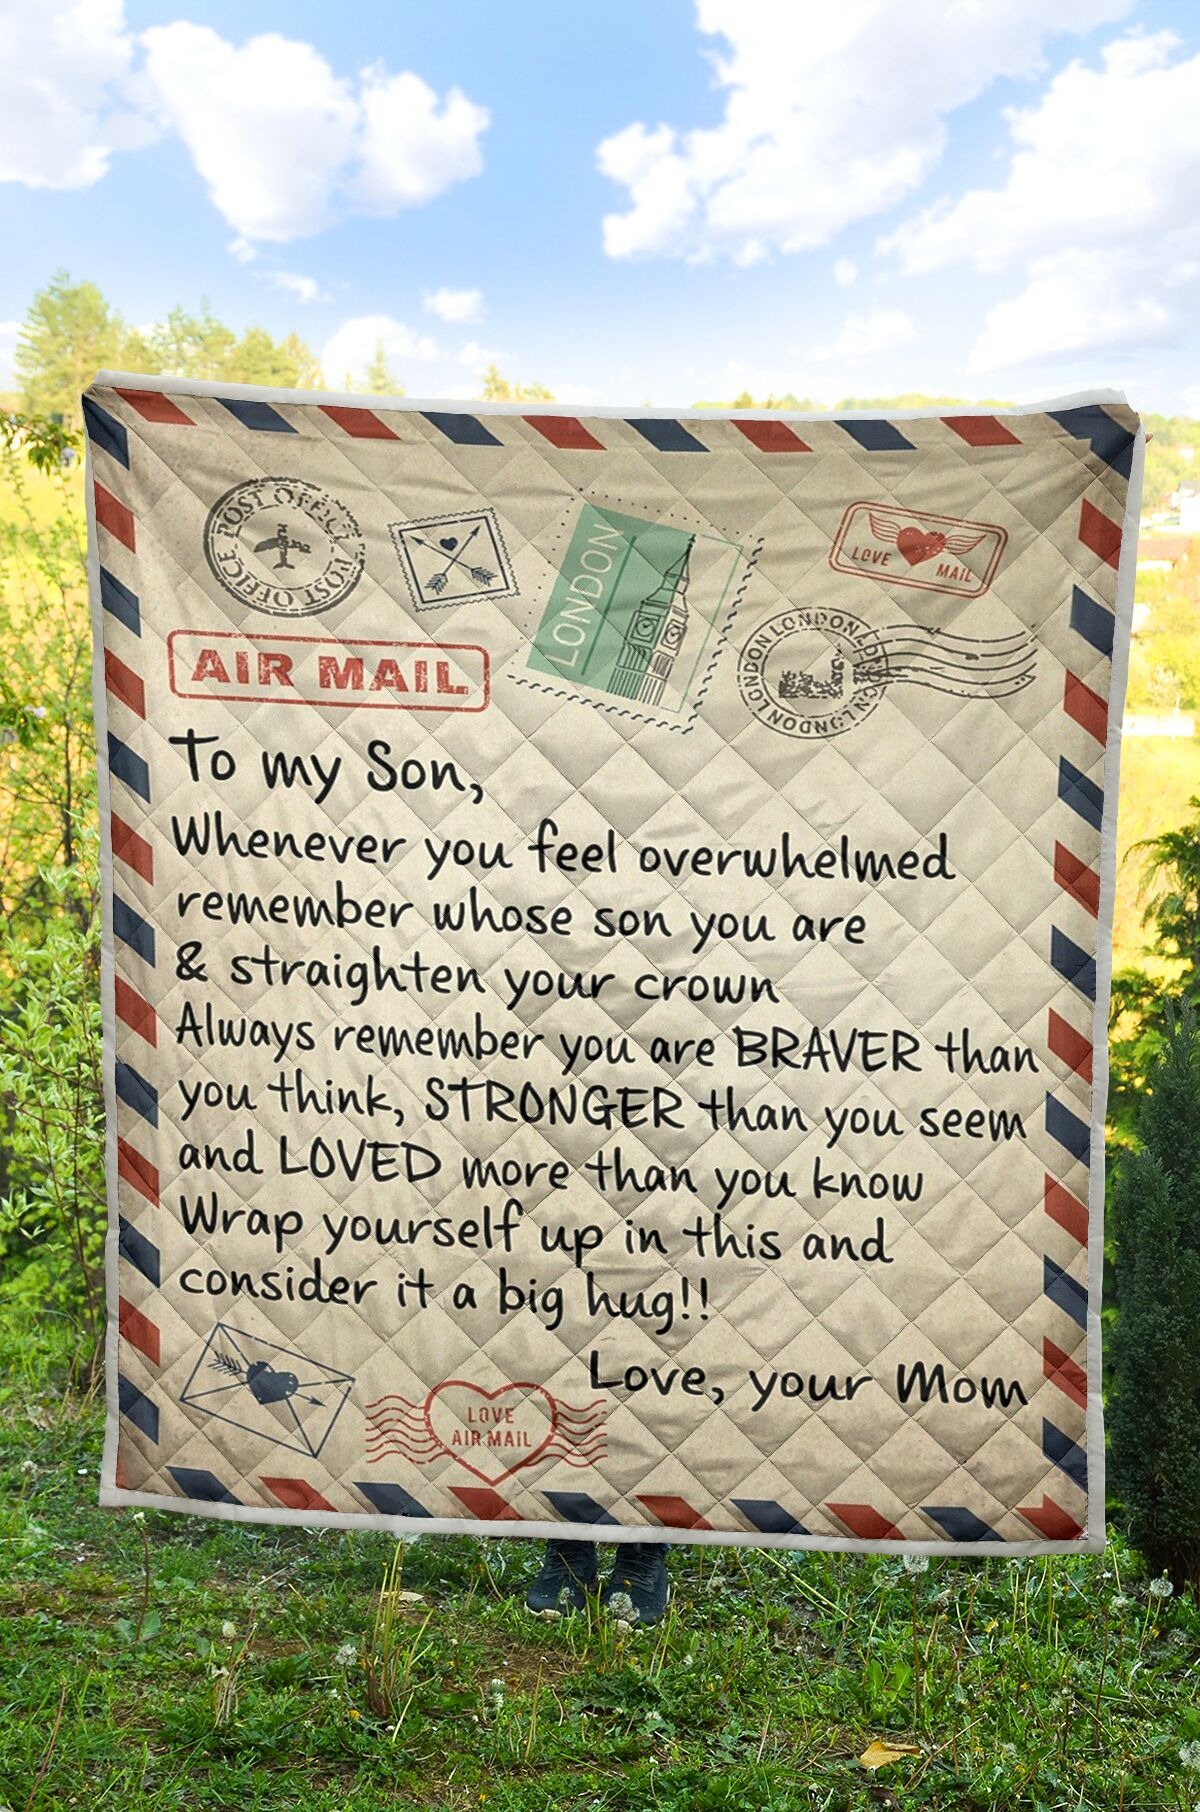 Air mail To my son whenever you feel overwhelmed blanket4